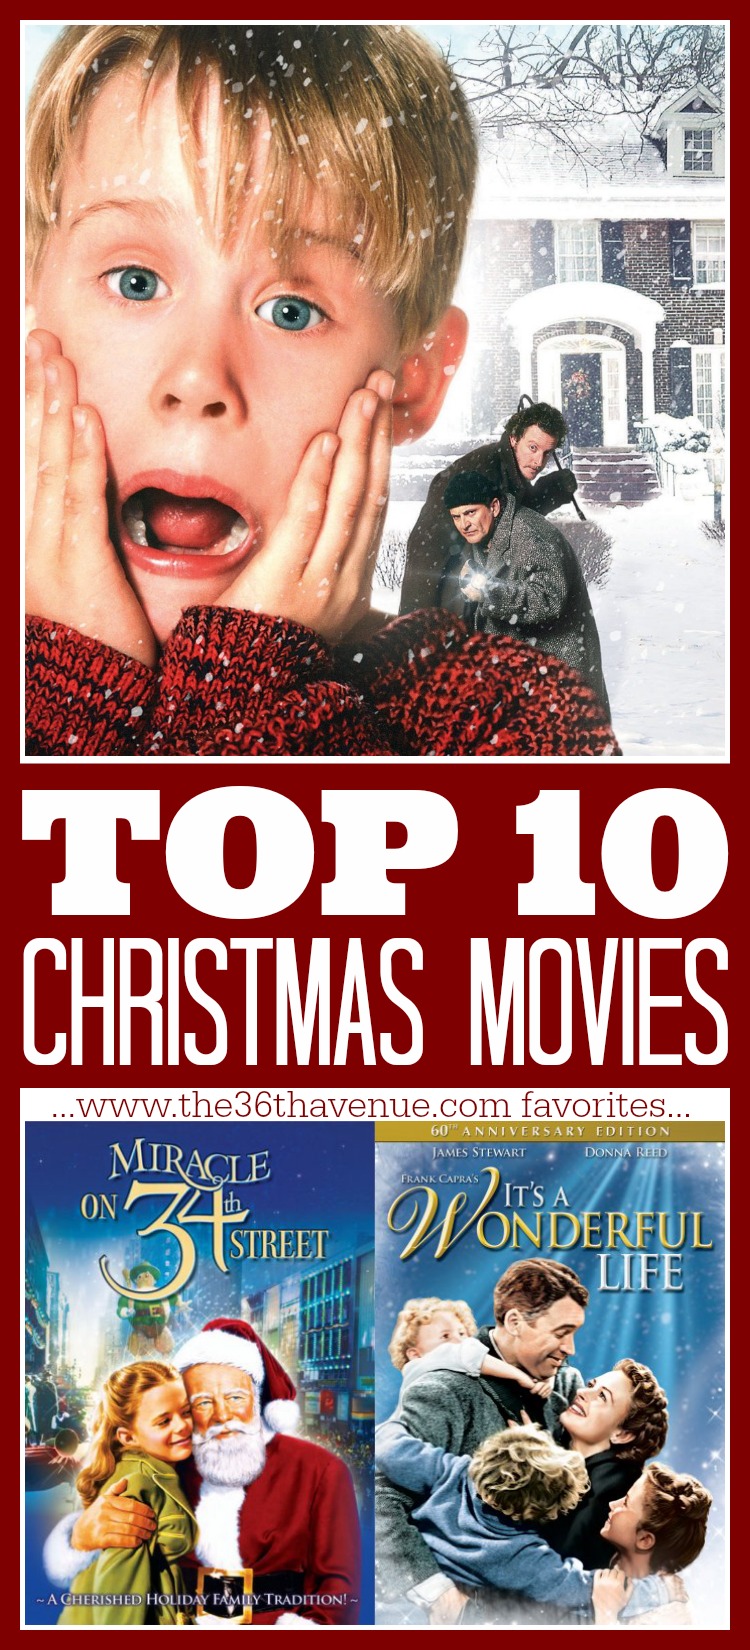 The 36th AVENUE  Top 10 Christmas Movies  The 36th AVENUE